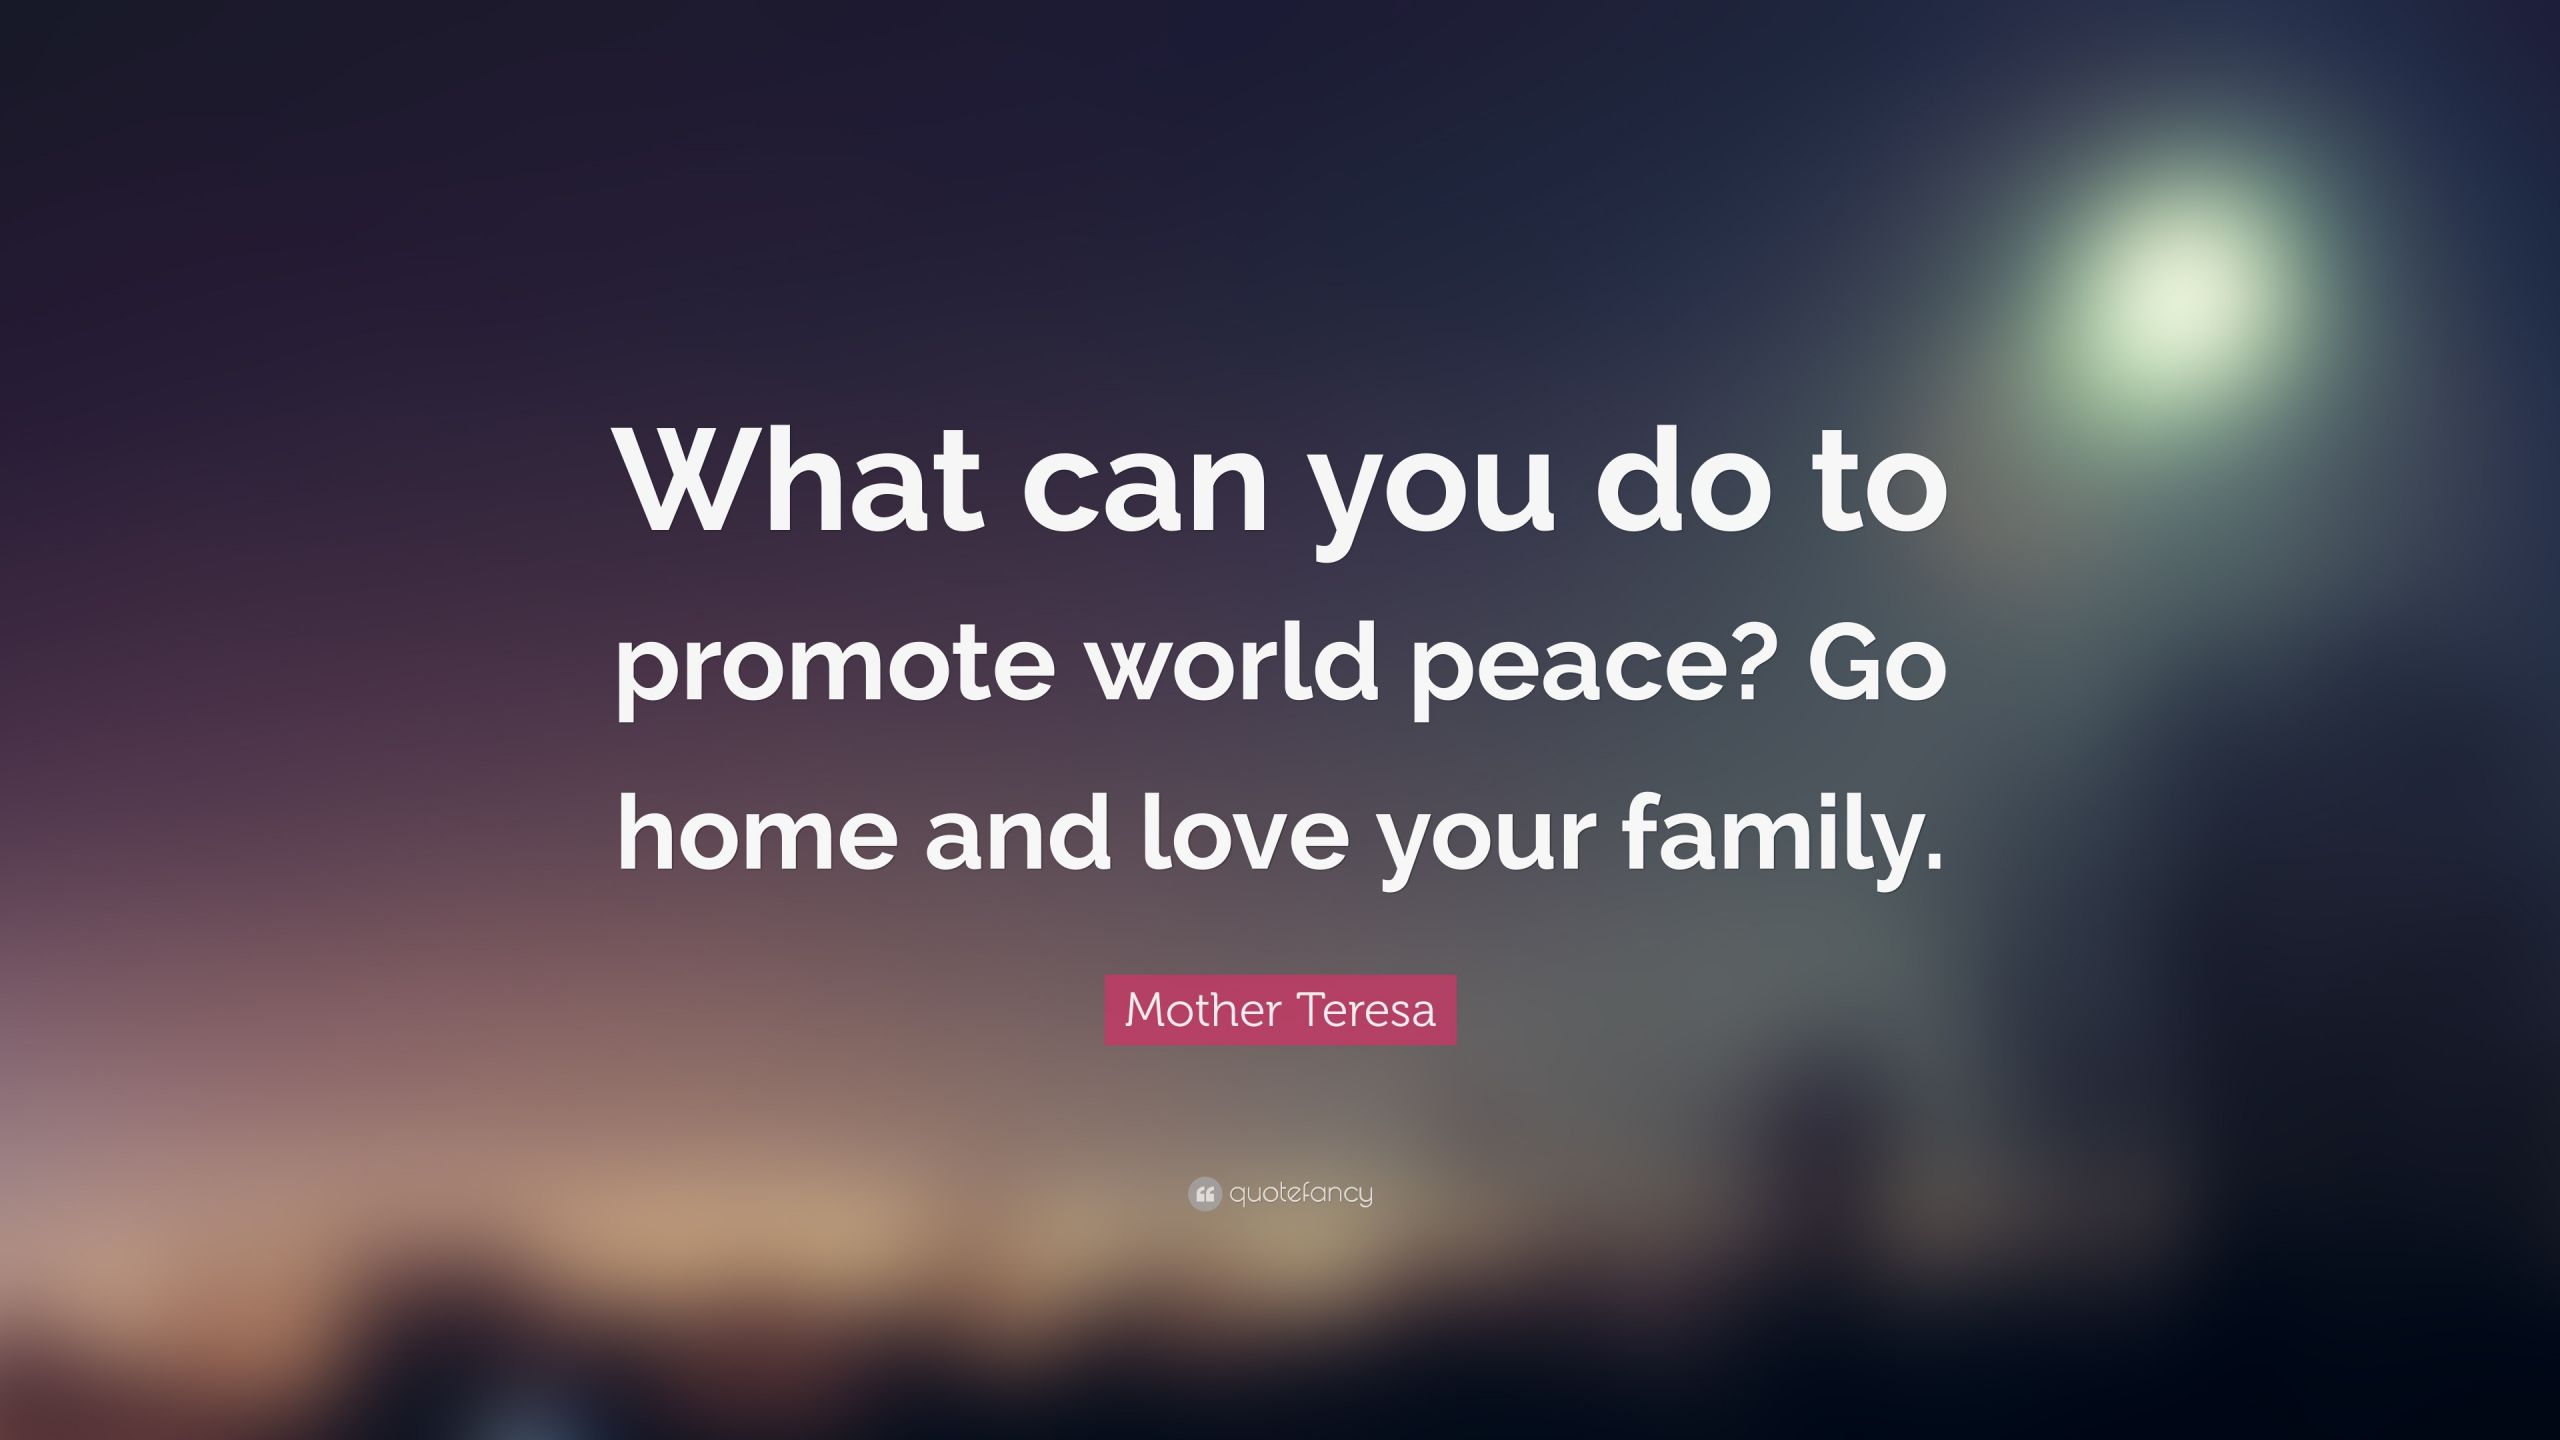 Mother Teresa Peace Quote
 Mother Teresa Quote “What can you do to promote world